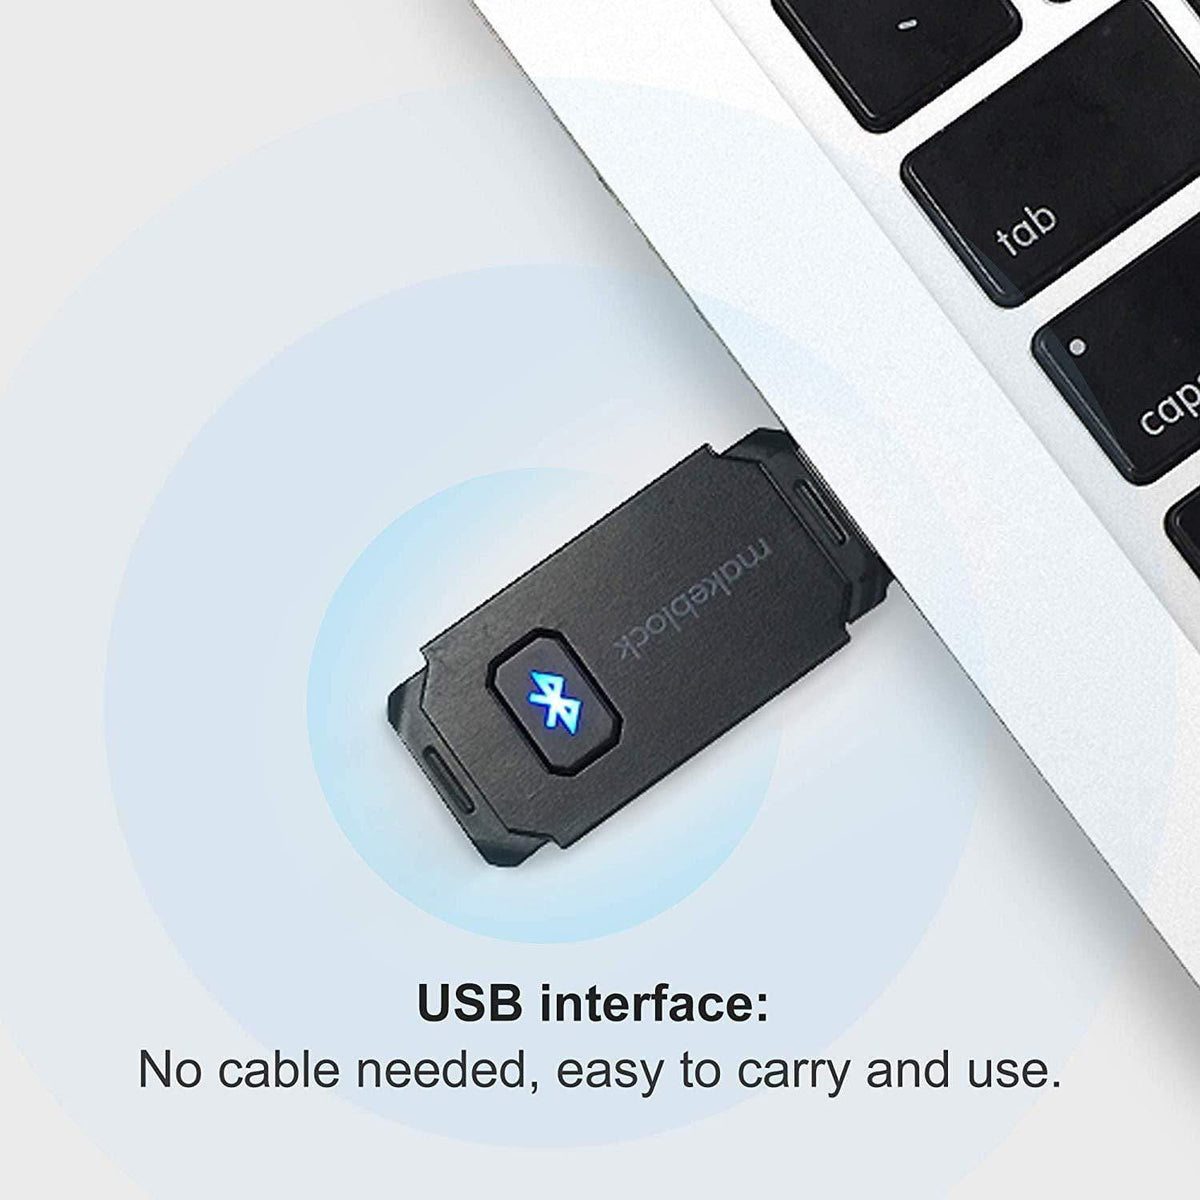 USB 2.0 Bluetooth Adapter, Bluetooth Dongle for PC Connectivity